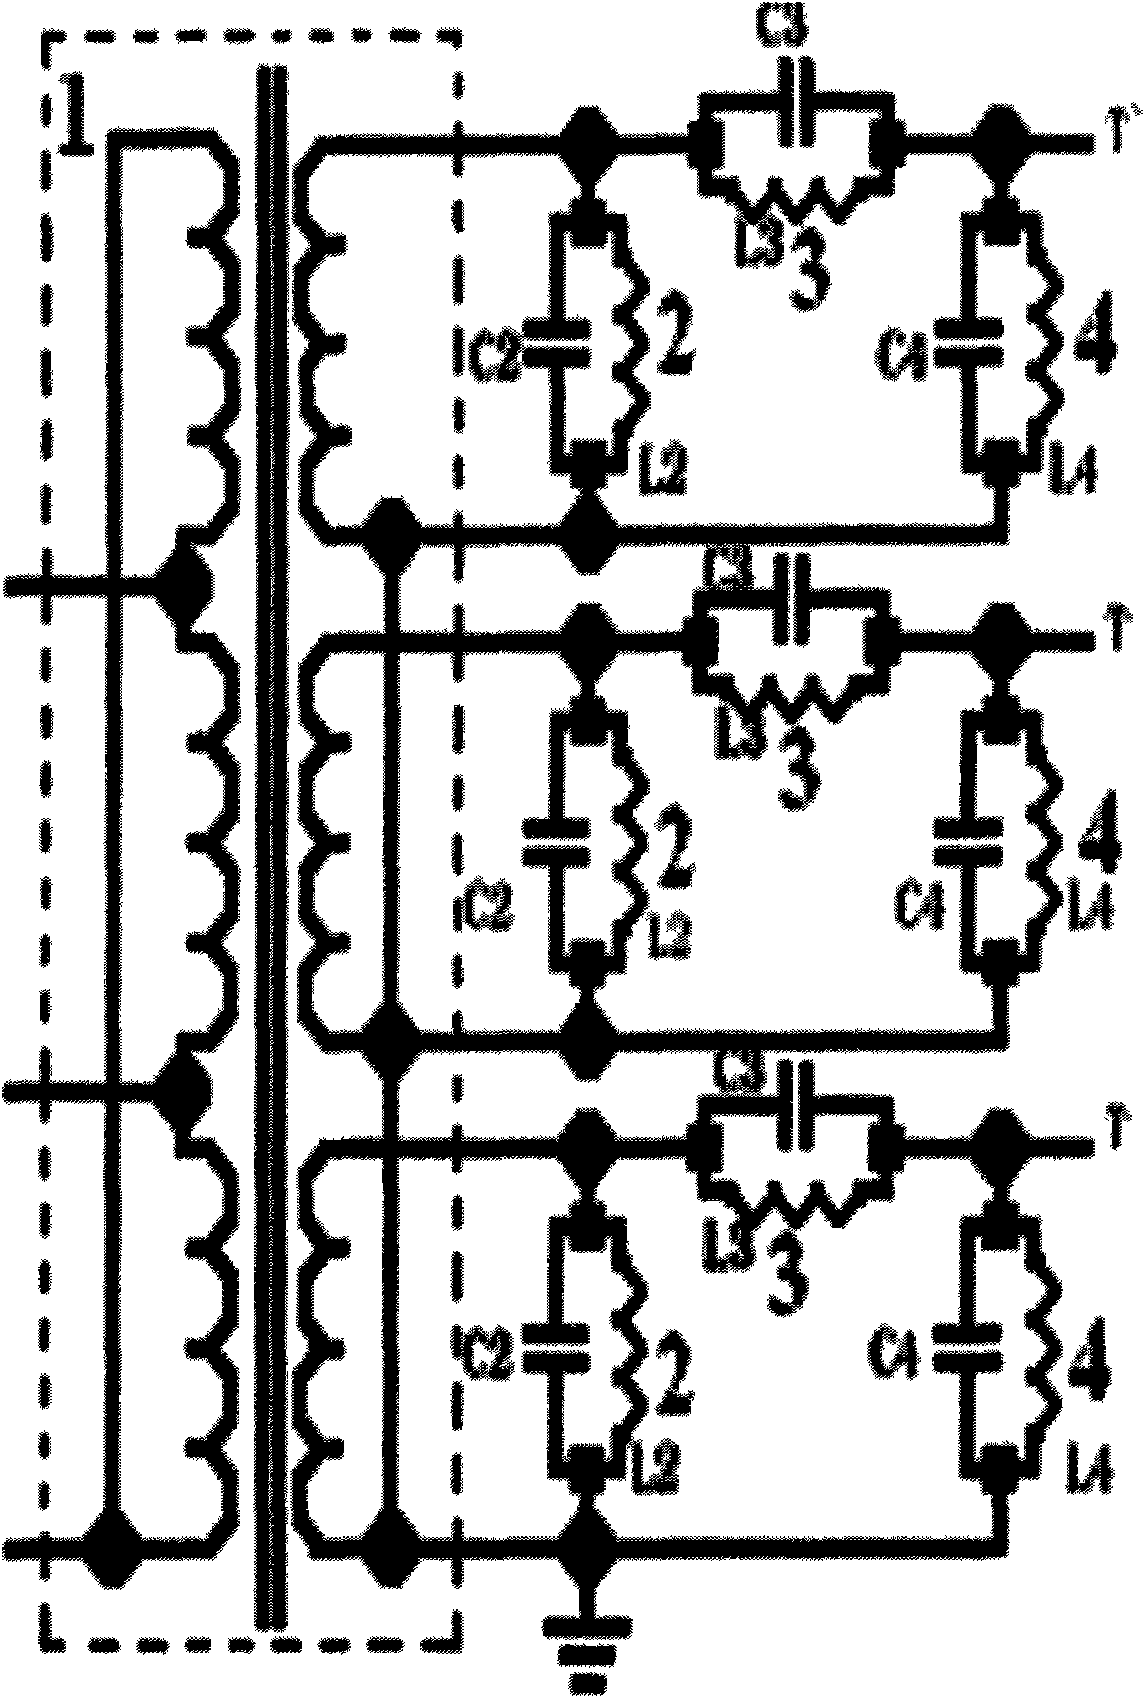 Network for dynamically suppressing power frequency interference of power transmission line